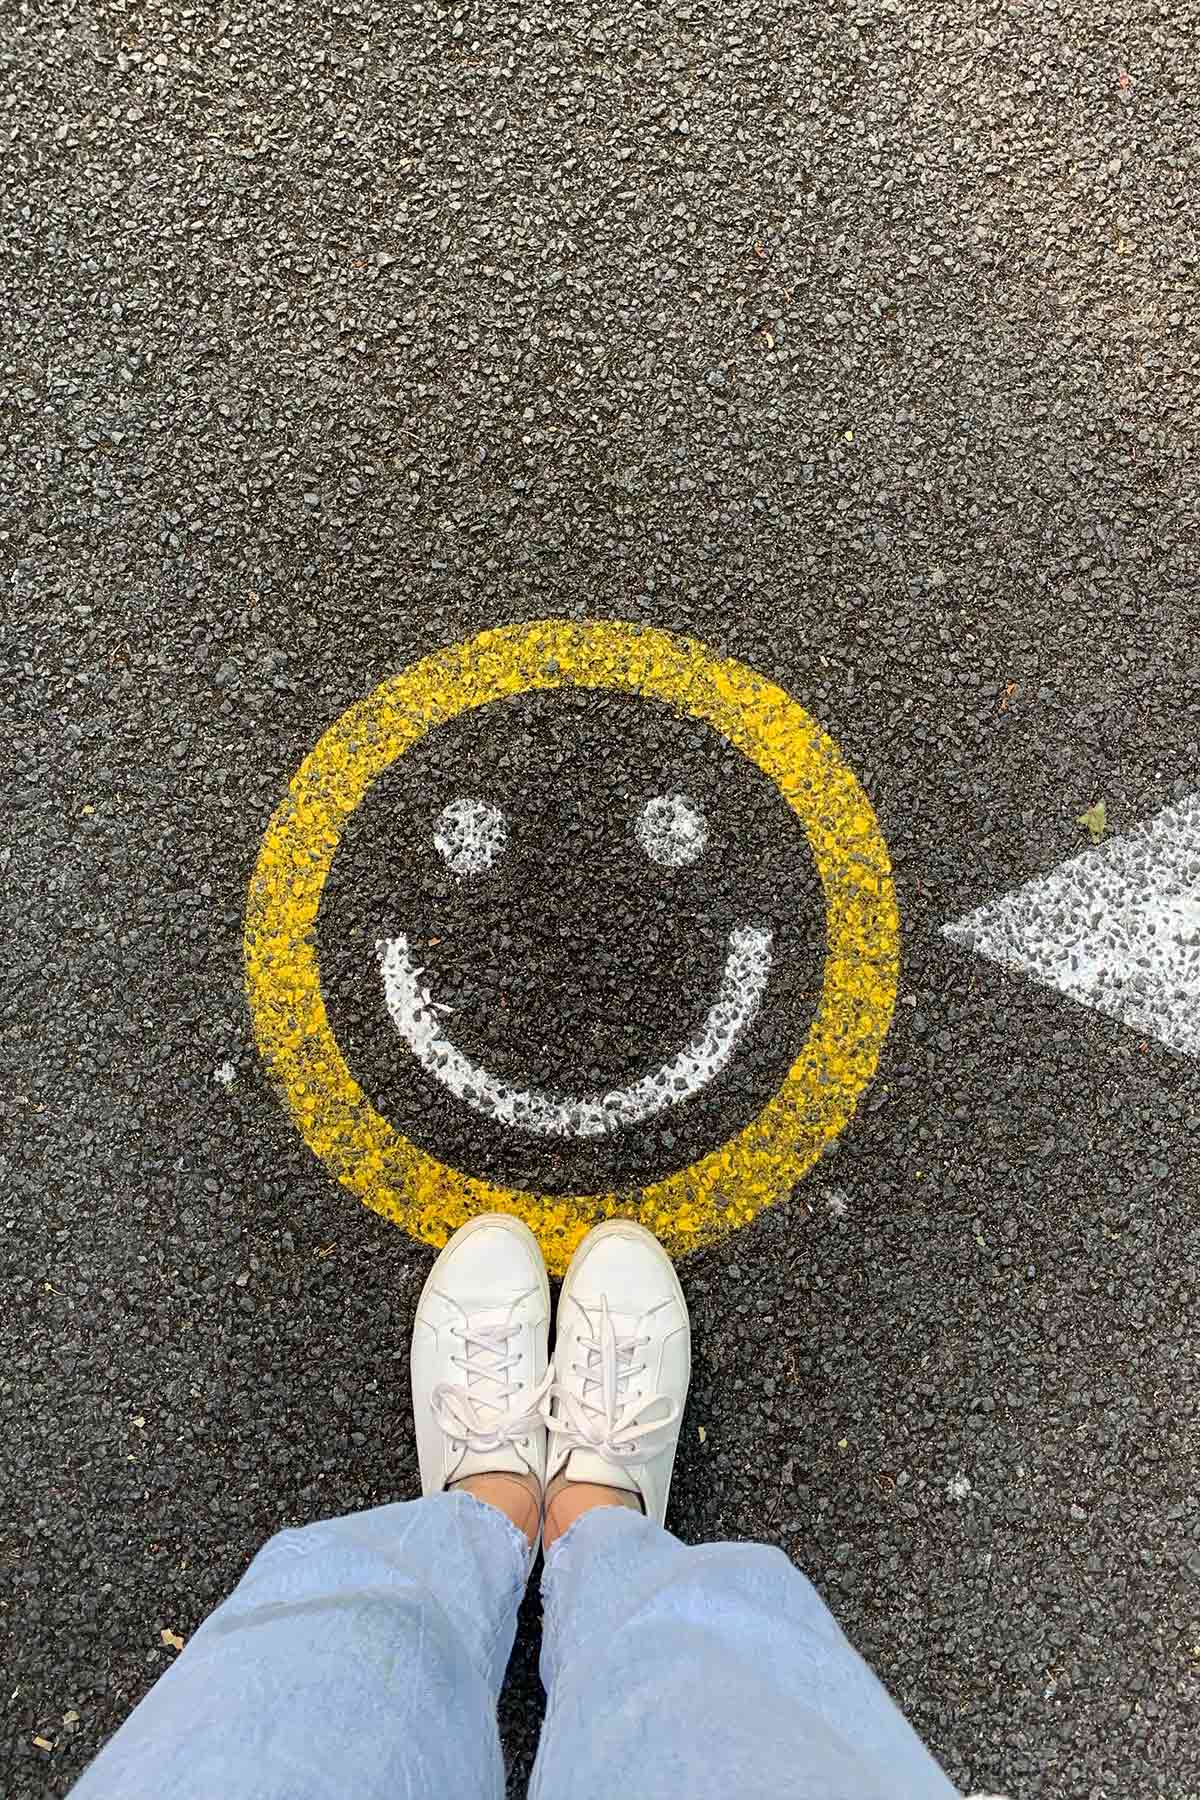 Painted smiley face on cement with white shoes